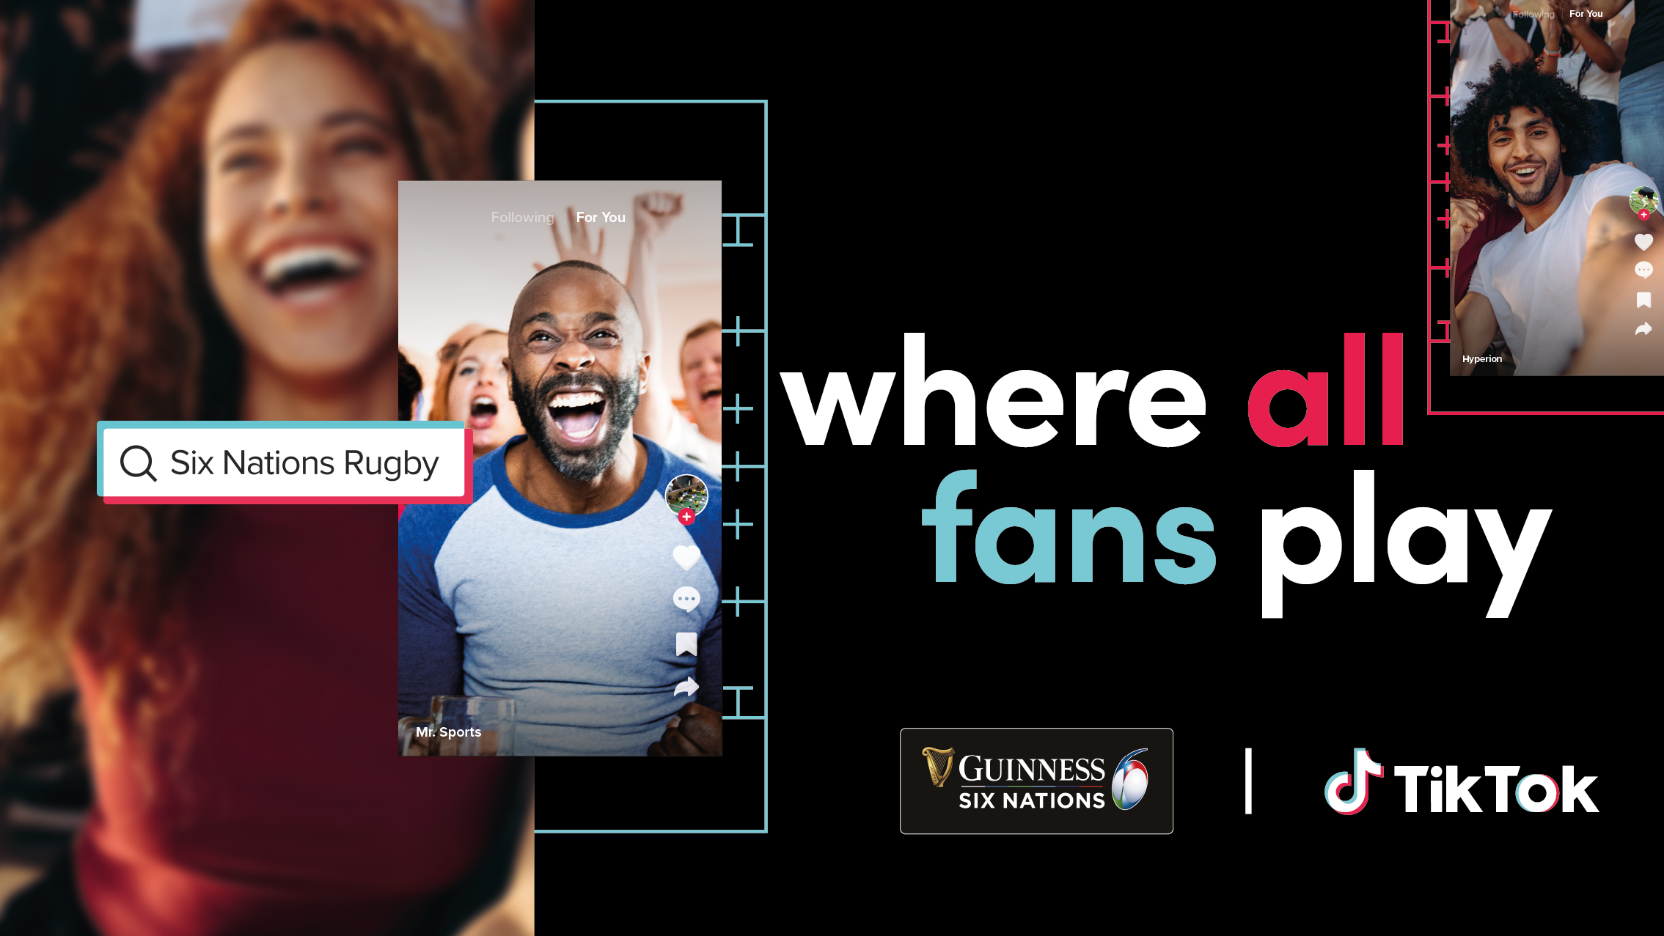 TikTok unveils plans for Six Nations Rugby coverage Mobile Marketing Magazine